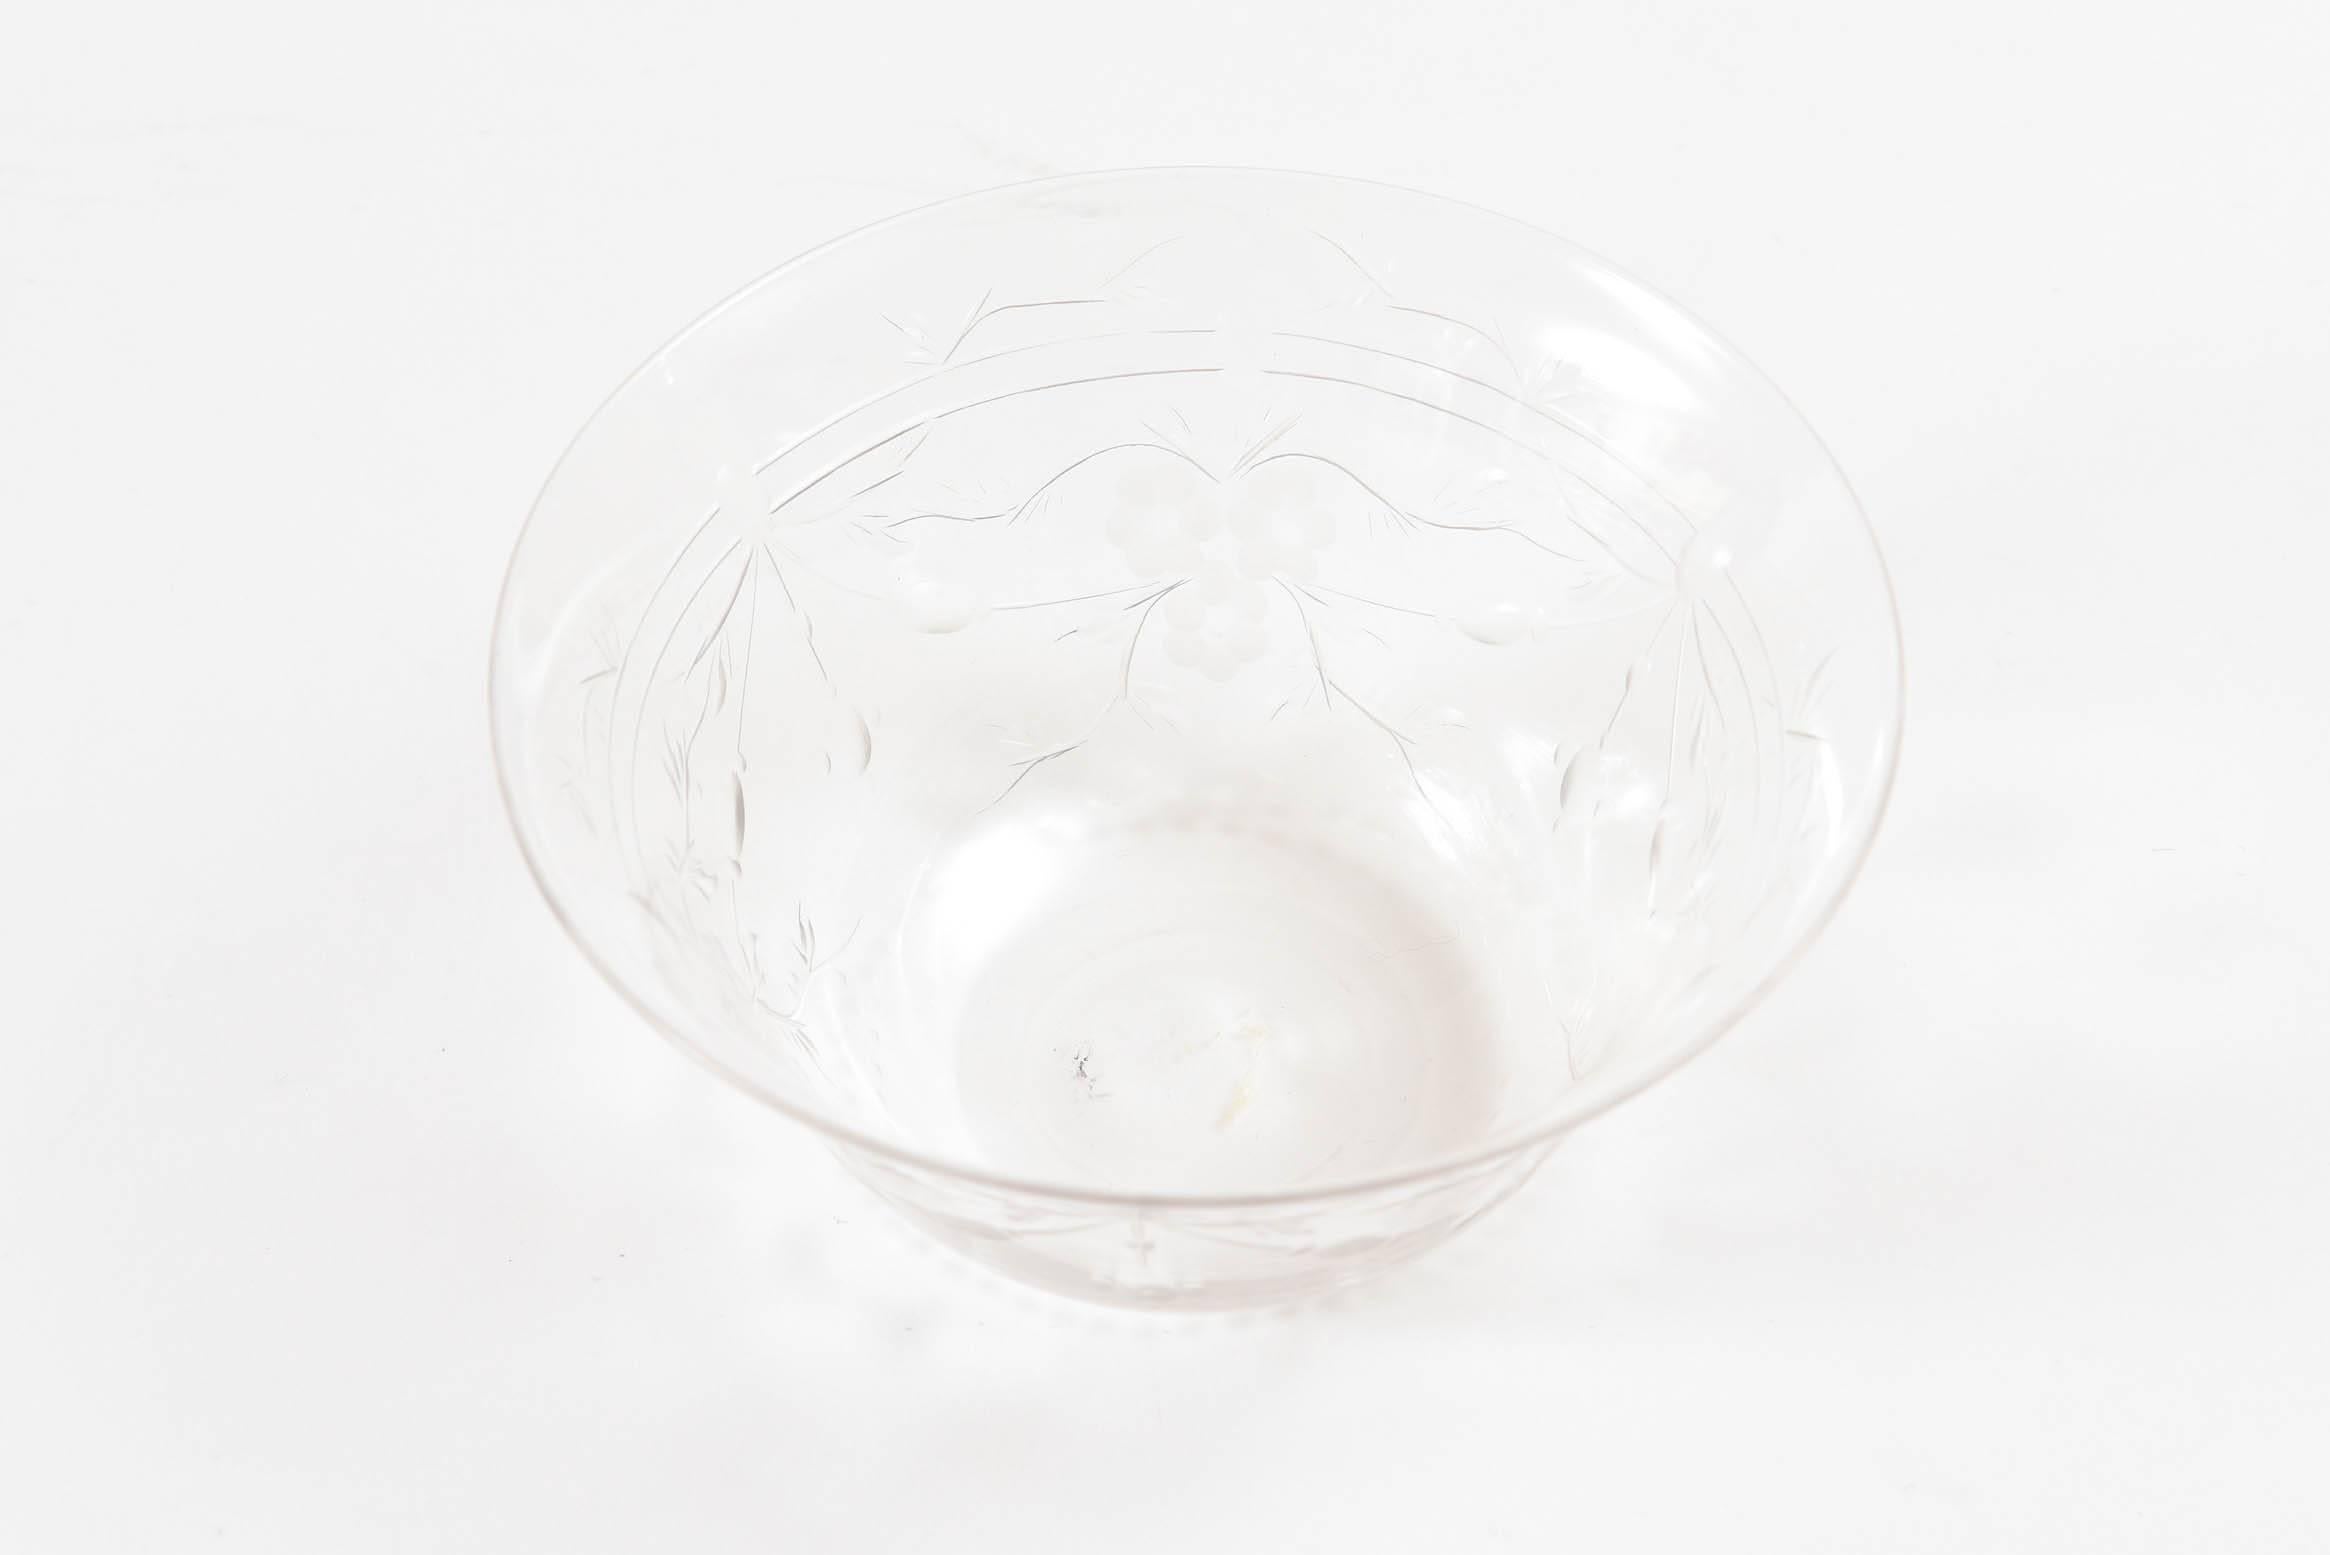 A suite of 8 blown crystal bowls featuring an elaborate all-over engraved floral design. A great size for ice cream, fruits or puddings. We attribute them to one of the fine English glass firms and in very nice antique condition.